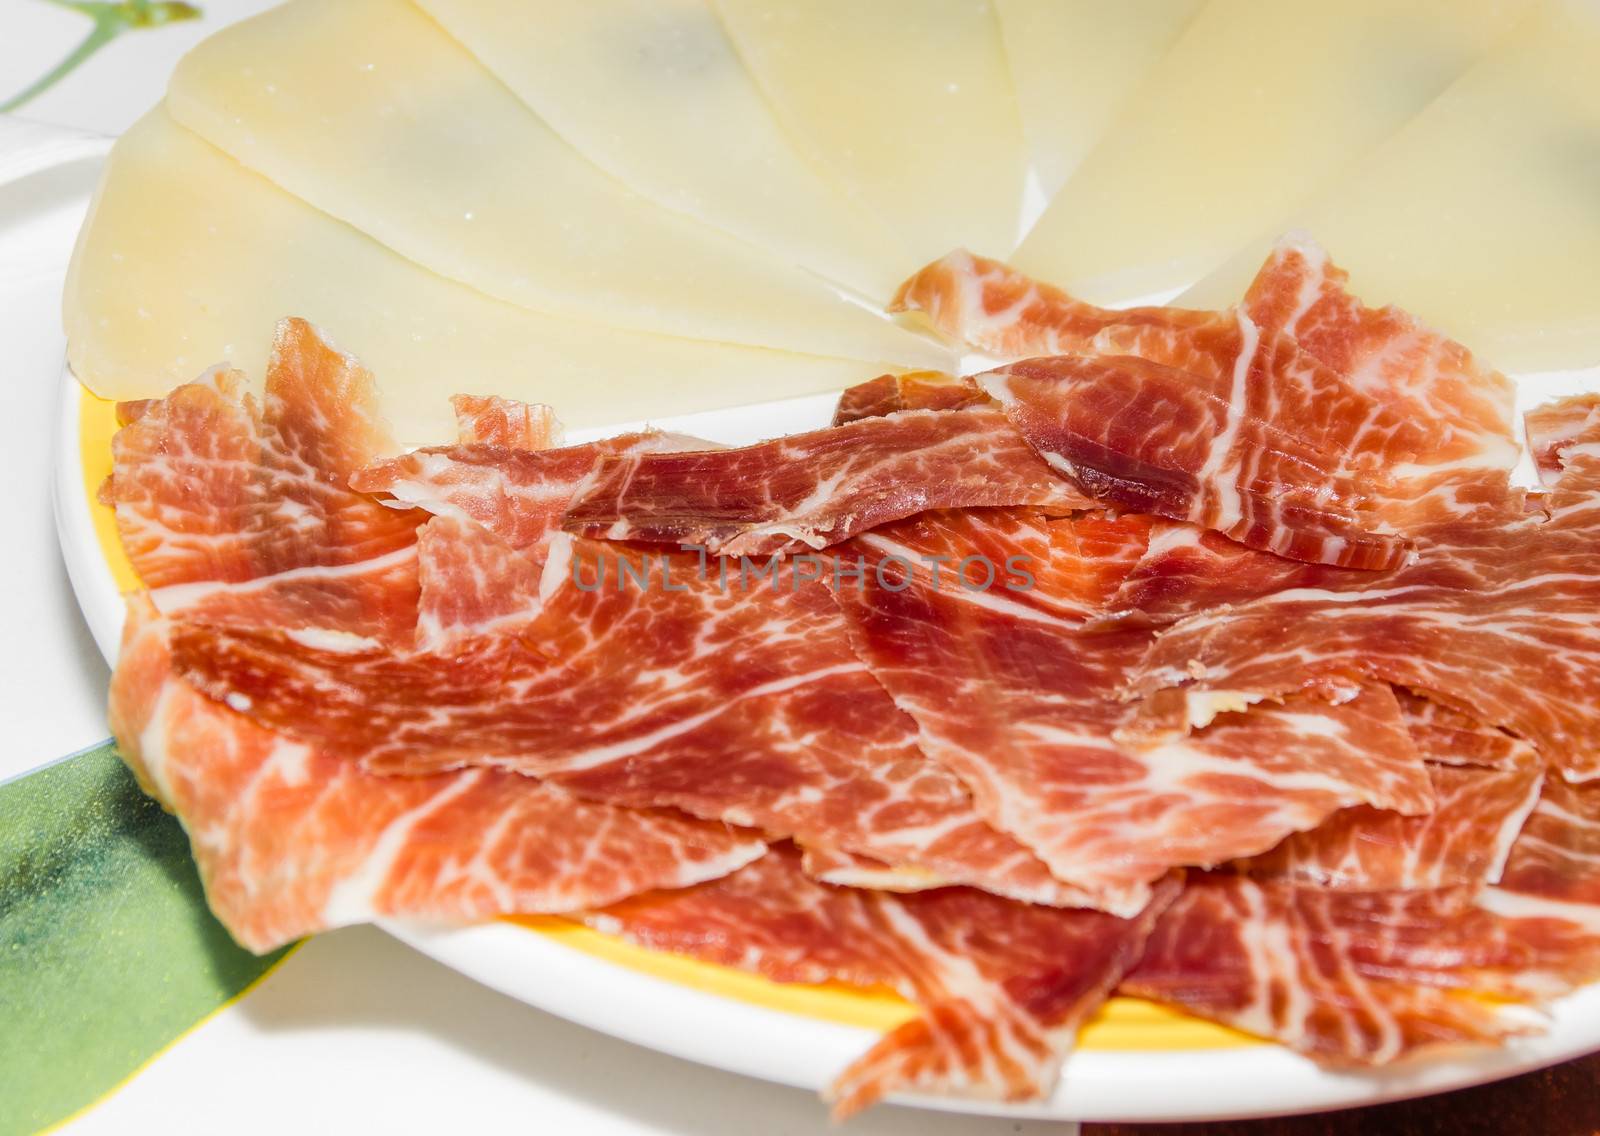 Closeup of typical spanish tapa, with slices of serrano ham and manchego cheese served in a plate